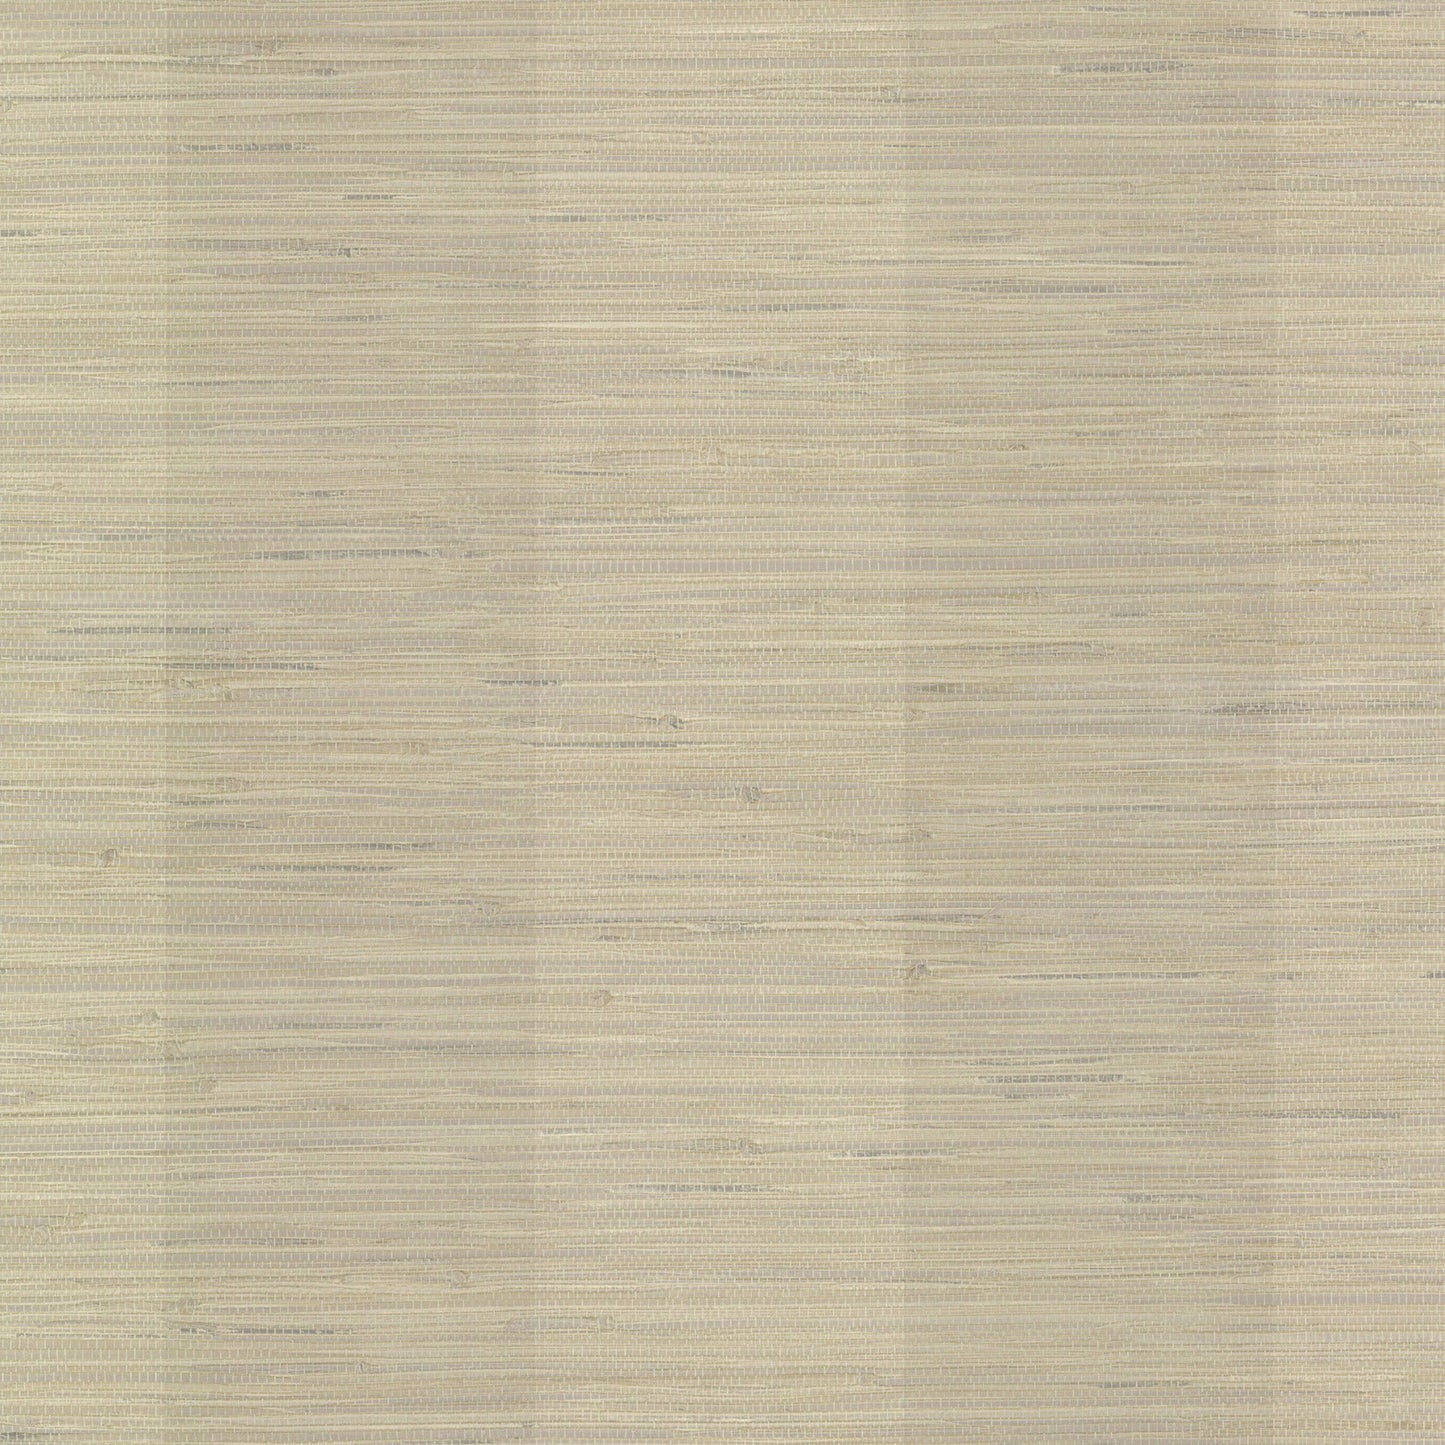 Find 2767-256015 Pasadena Grey Grasscloth Stripe Techniques & Finishes III Brewster